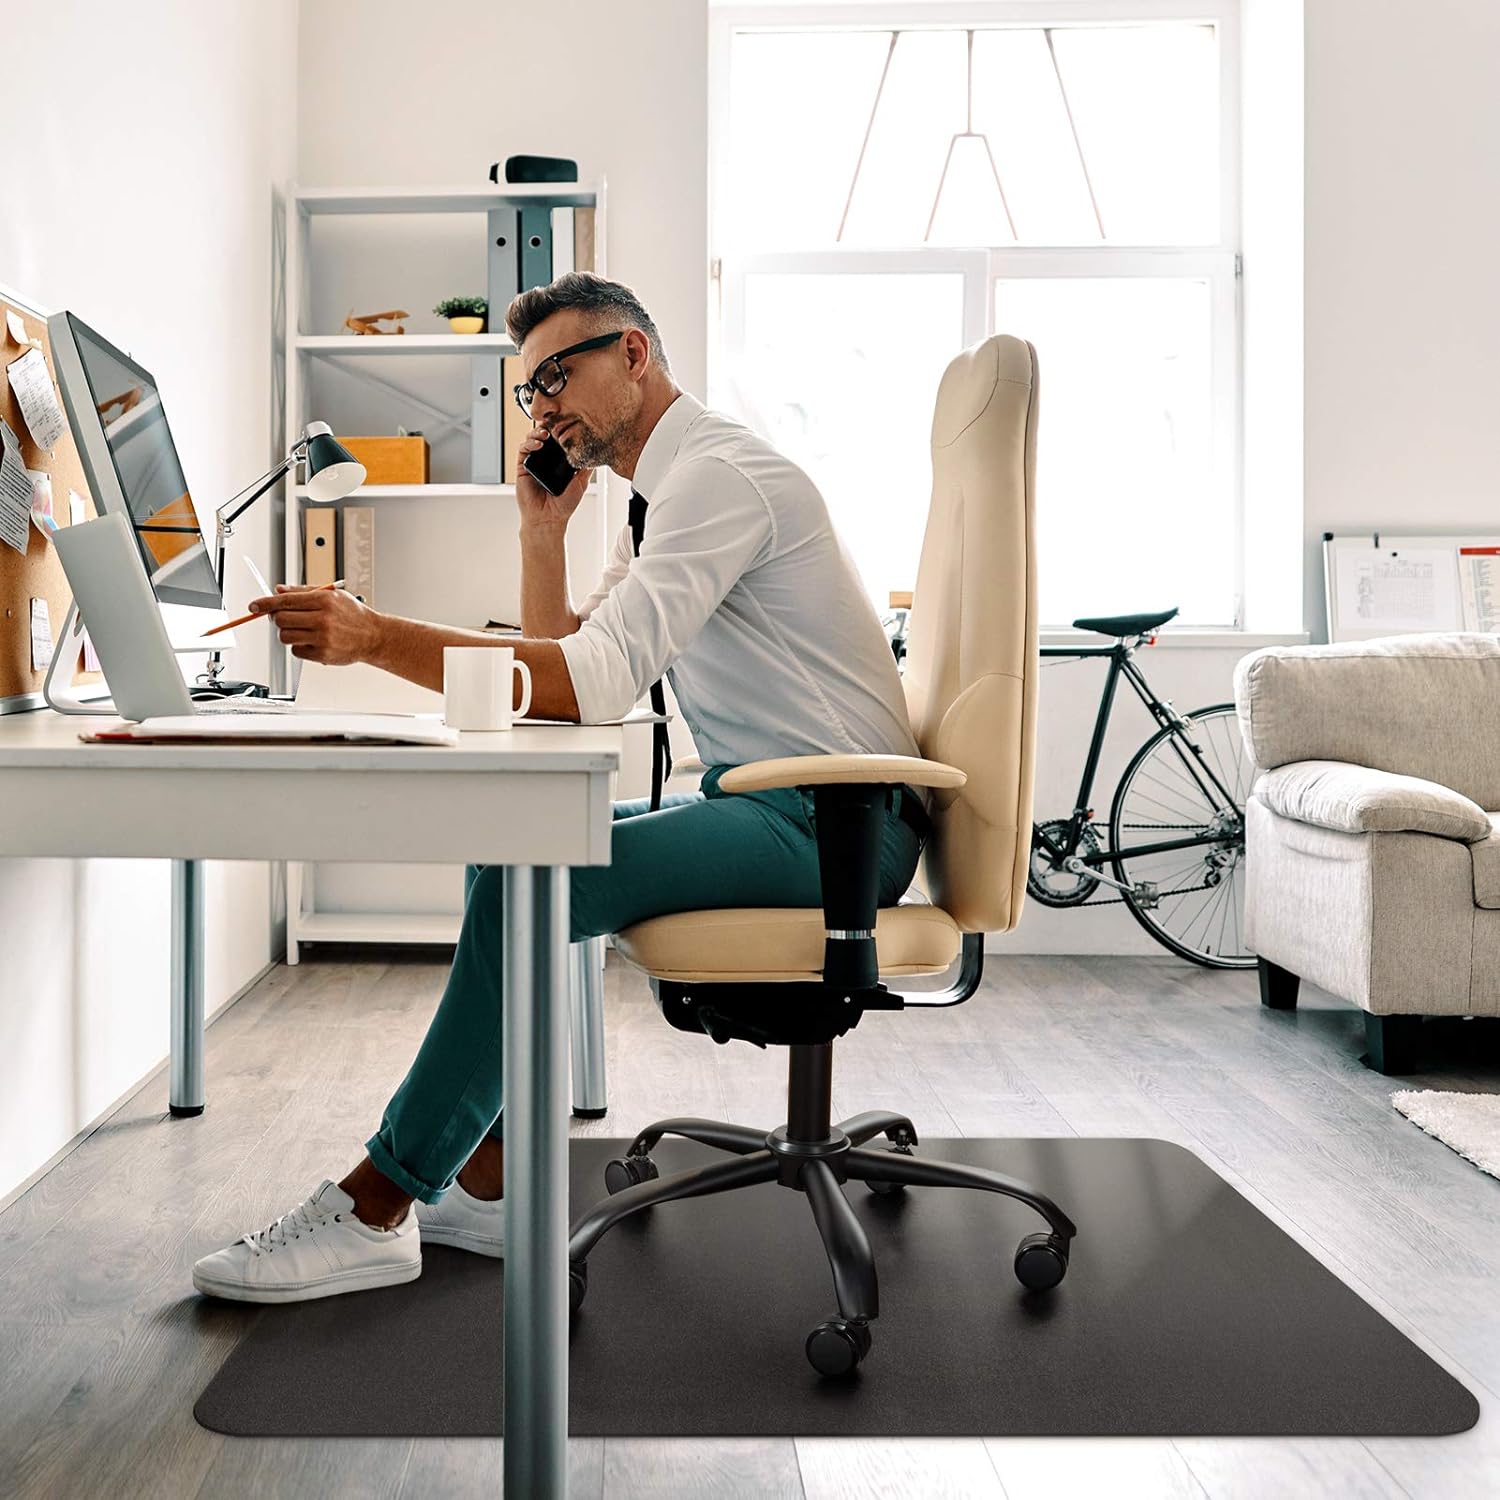 Looking to Buy The Best Office Chair This Year. Find Out The Top 10 Urban Shop Office Chairs